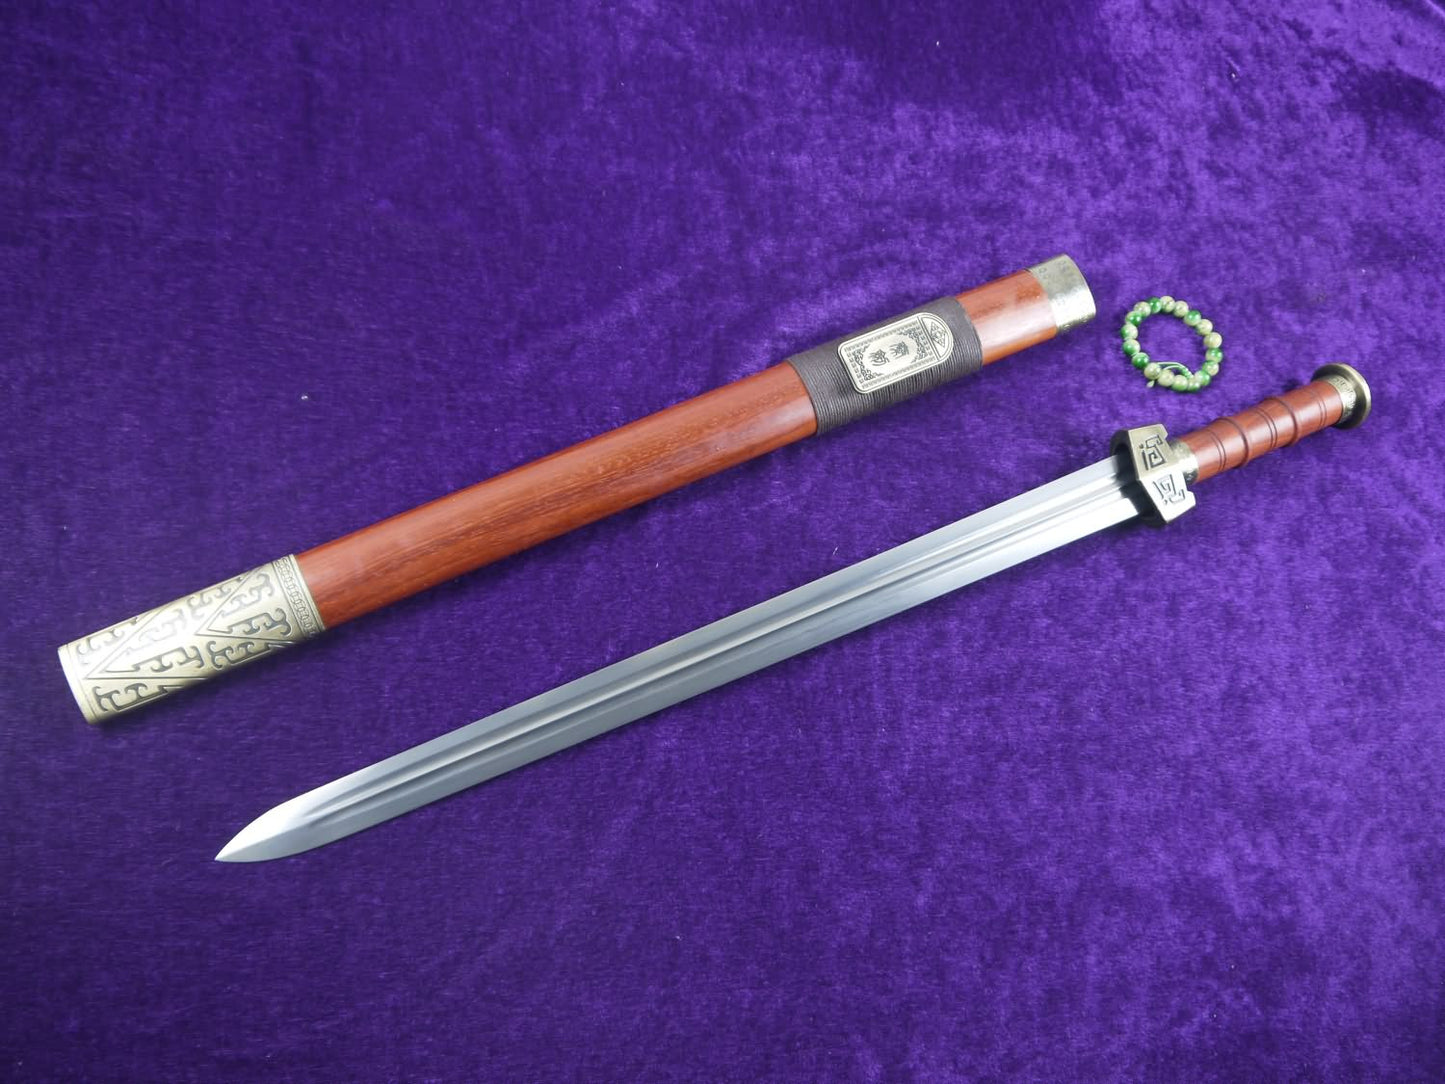 Qin sword,Folding steel blade,Redwood scabbard,Alloy fitting,Length 30 inch - Chinese sword shop